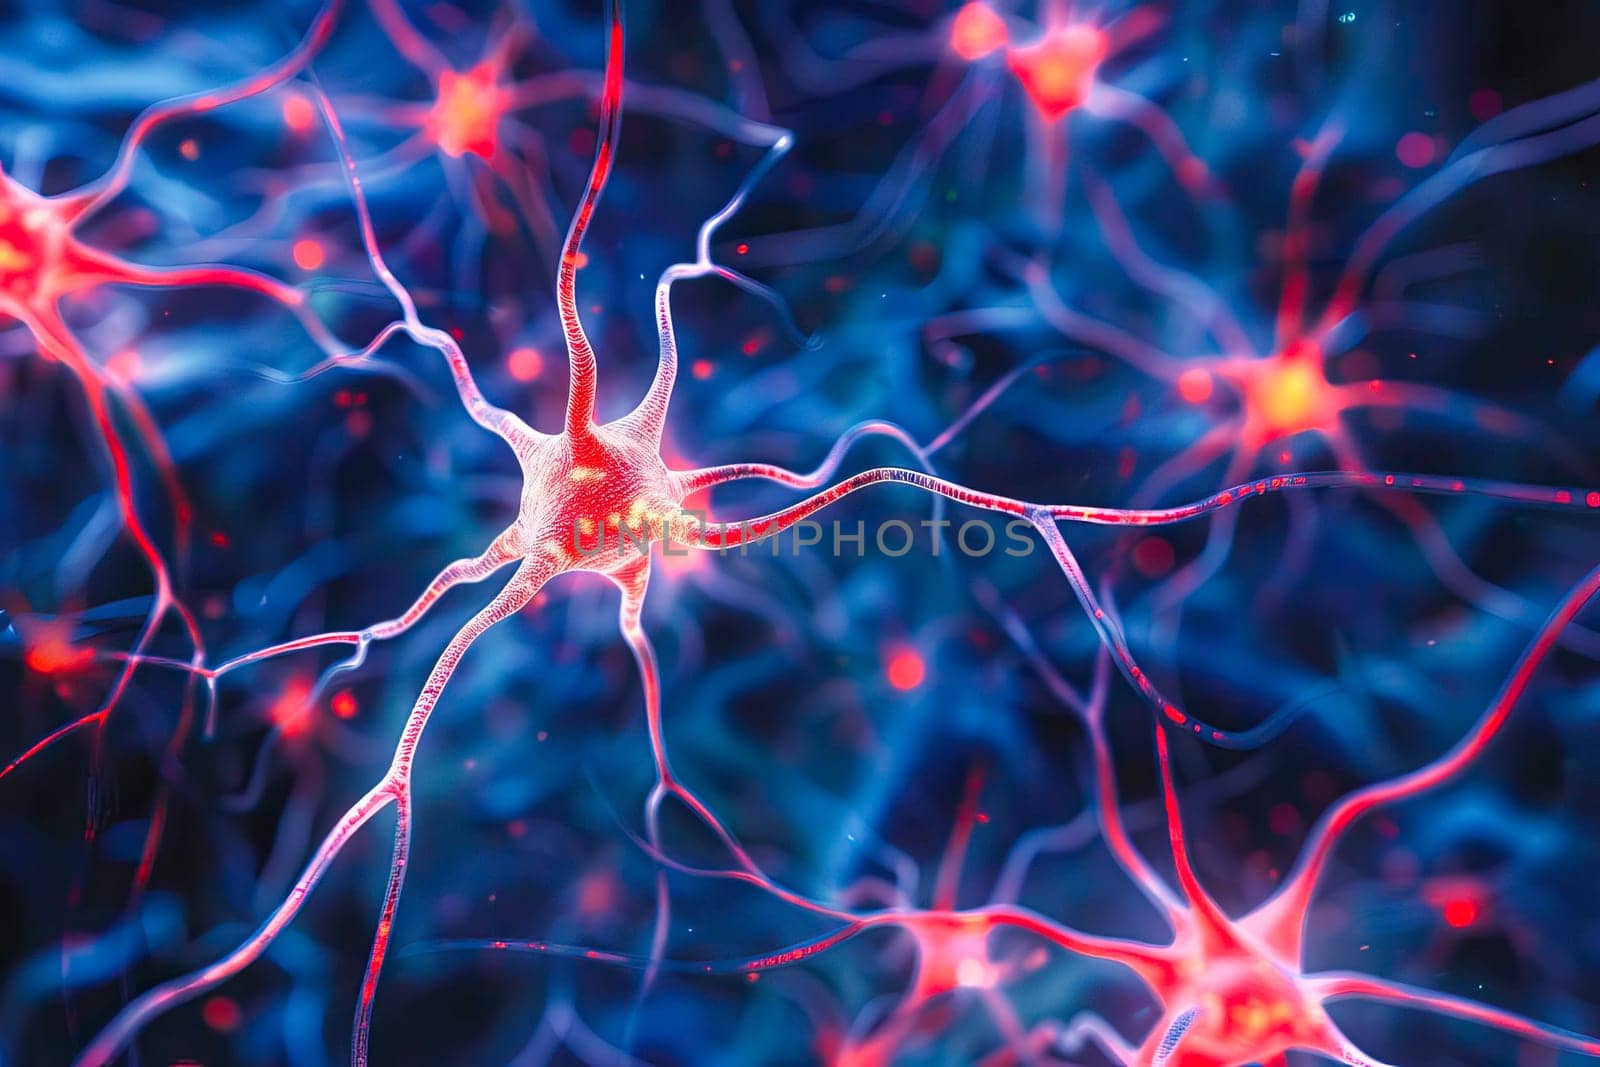 A detailed close-up view of a red and blue human brain with neurons firing.